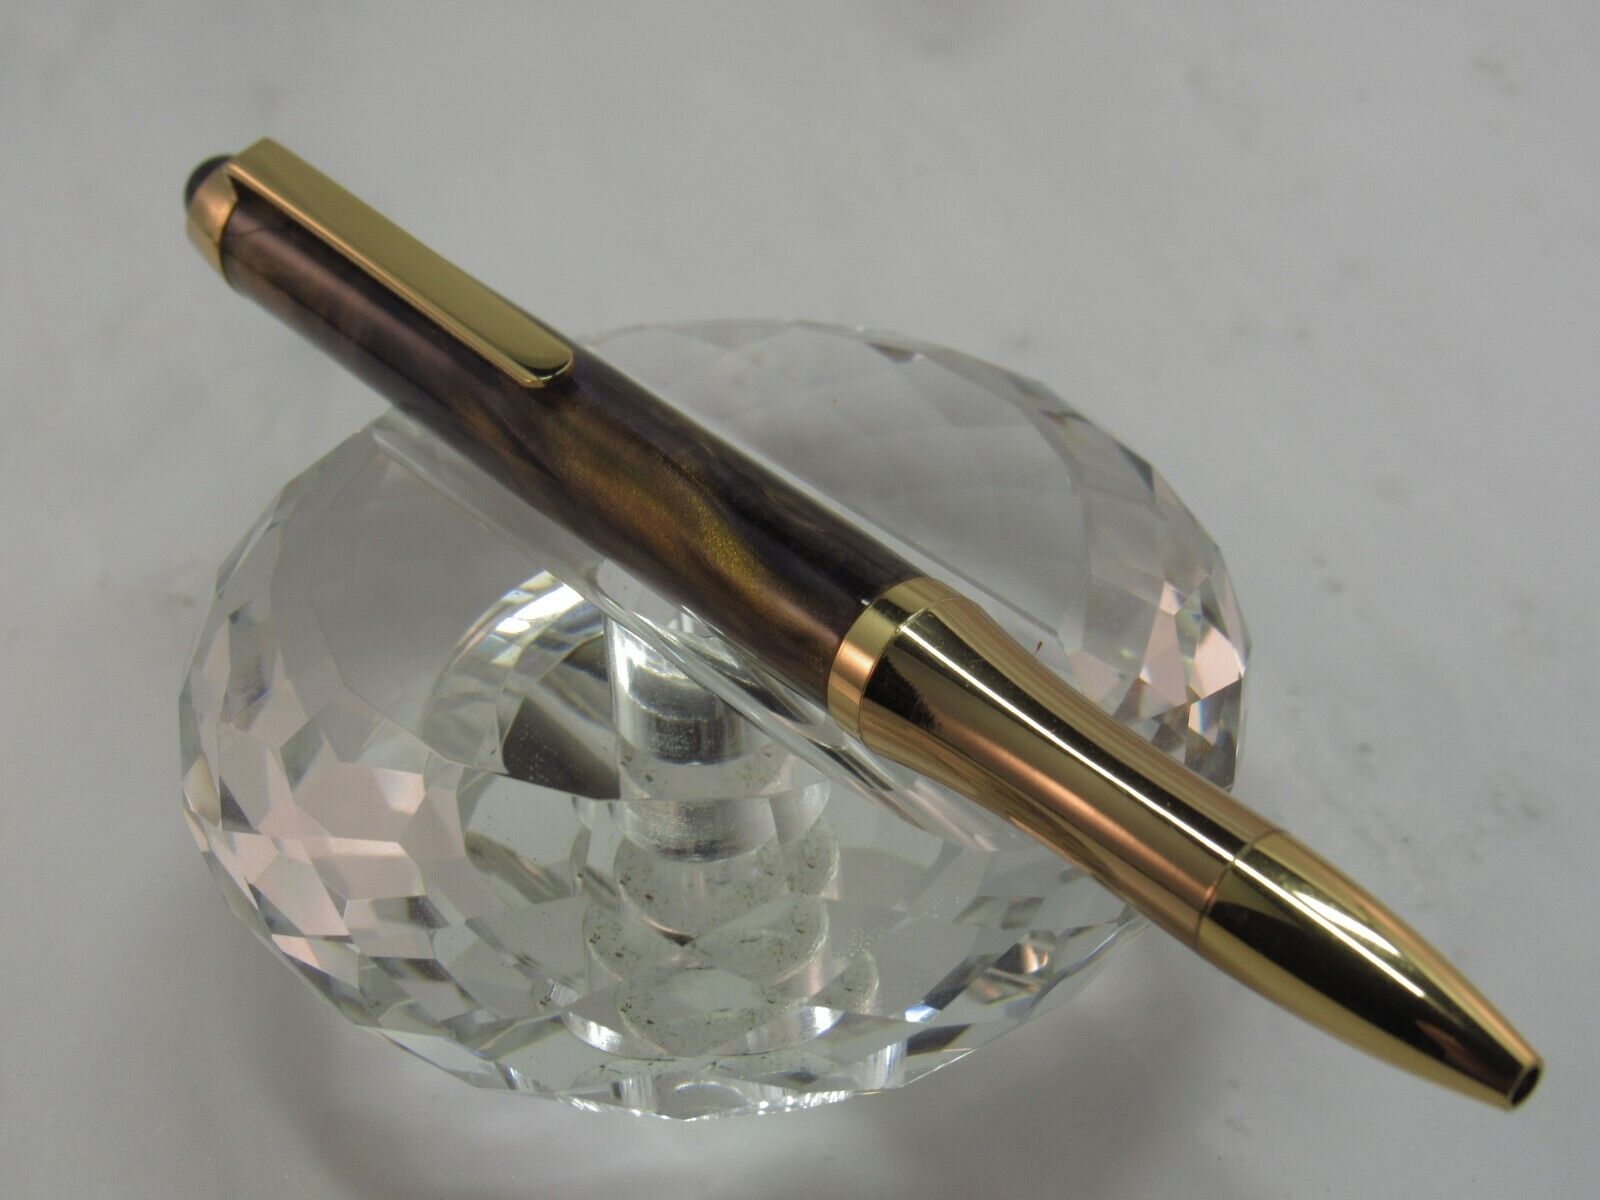 STUNNING ECLIPSE COPPER PEARL ACRYLIC TWIST BALL POINT PEN 24KT GOLD